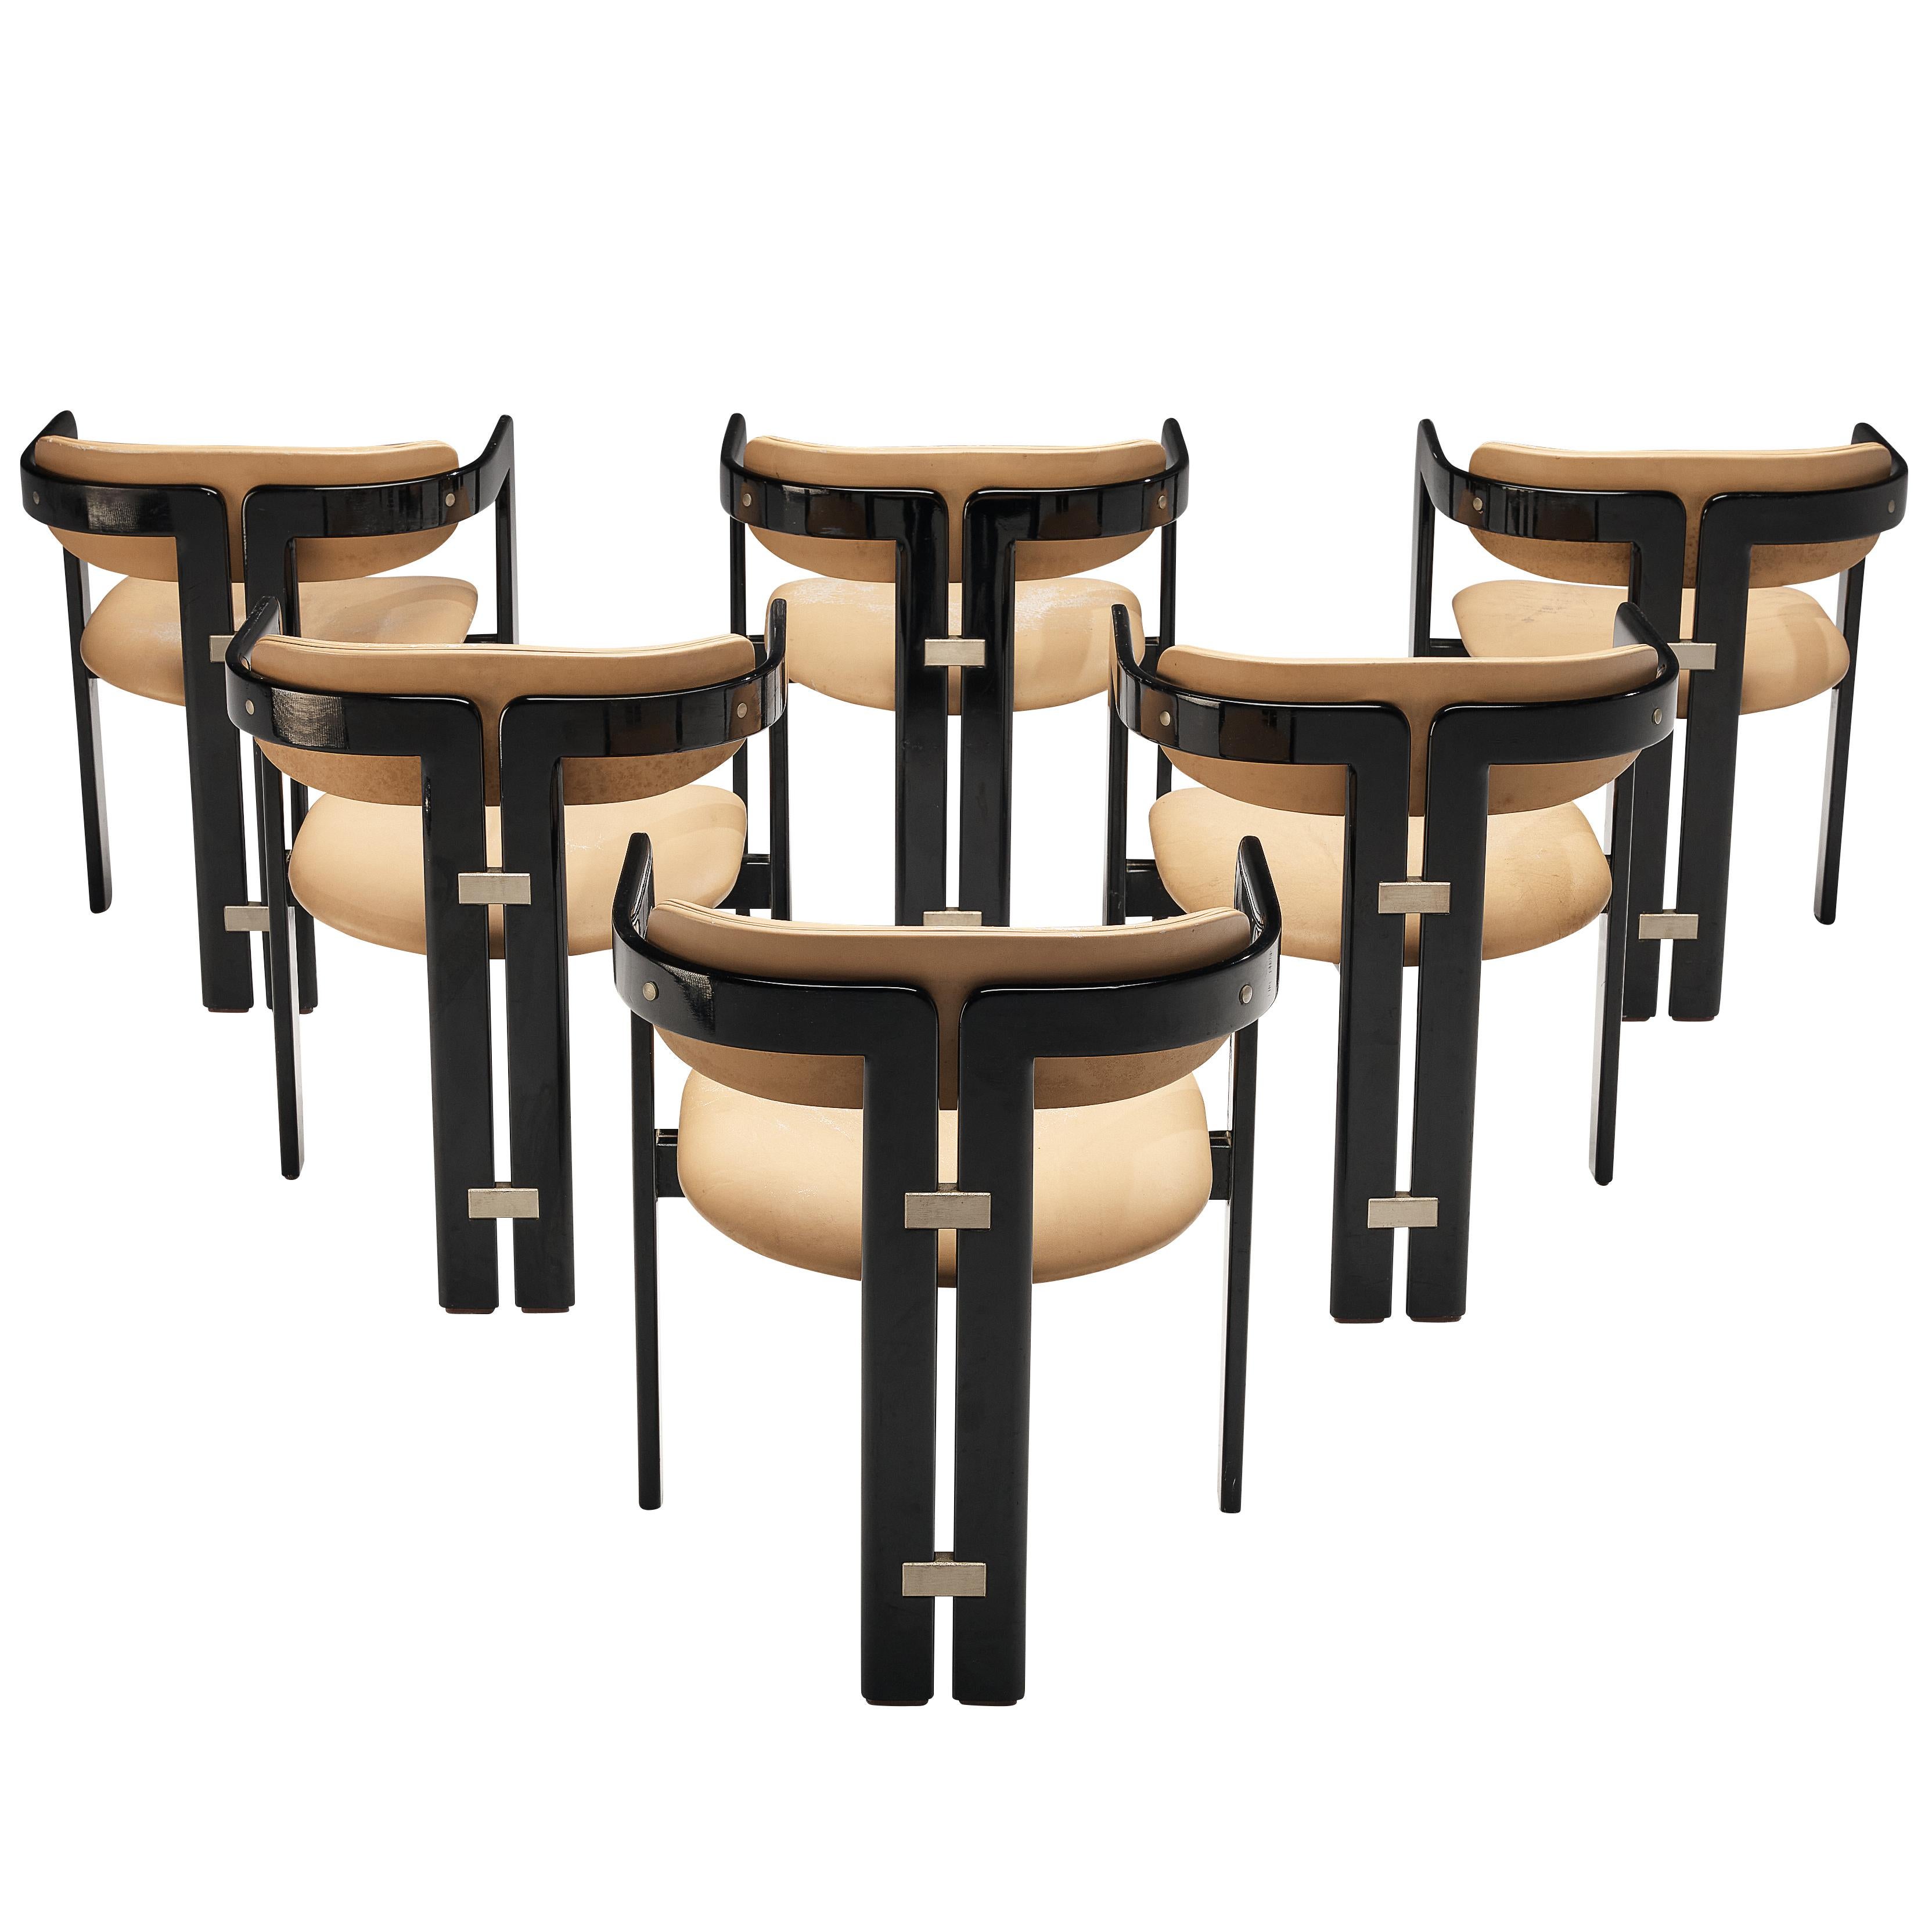 Augusto Savini for Pozzi, set of six 'Pamplona' dining chairs, wood, beige leather, aluminum, Italy, 1965

Set of six armchairs in black lacquered ash and beige leather. A characteristic design; simplistic yet very strong in lines and proportions.